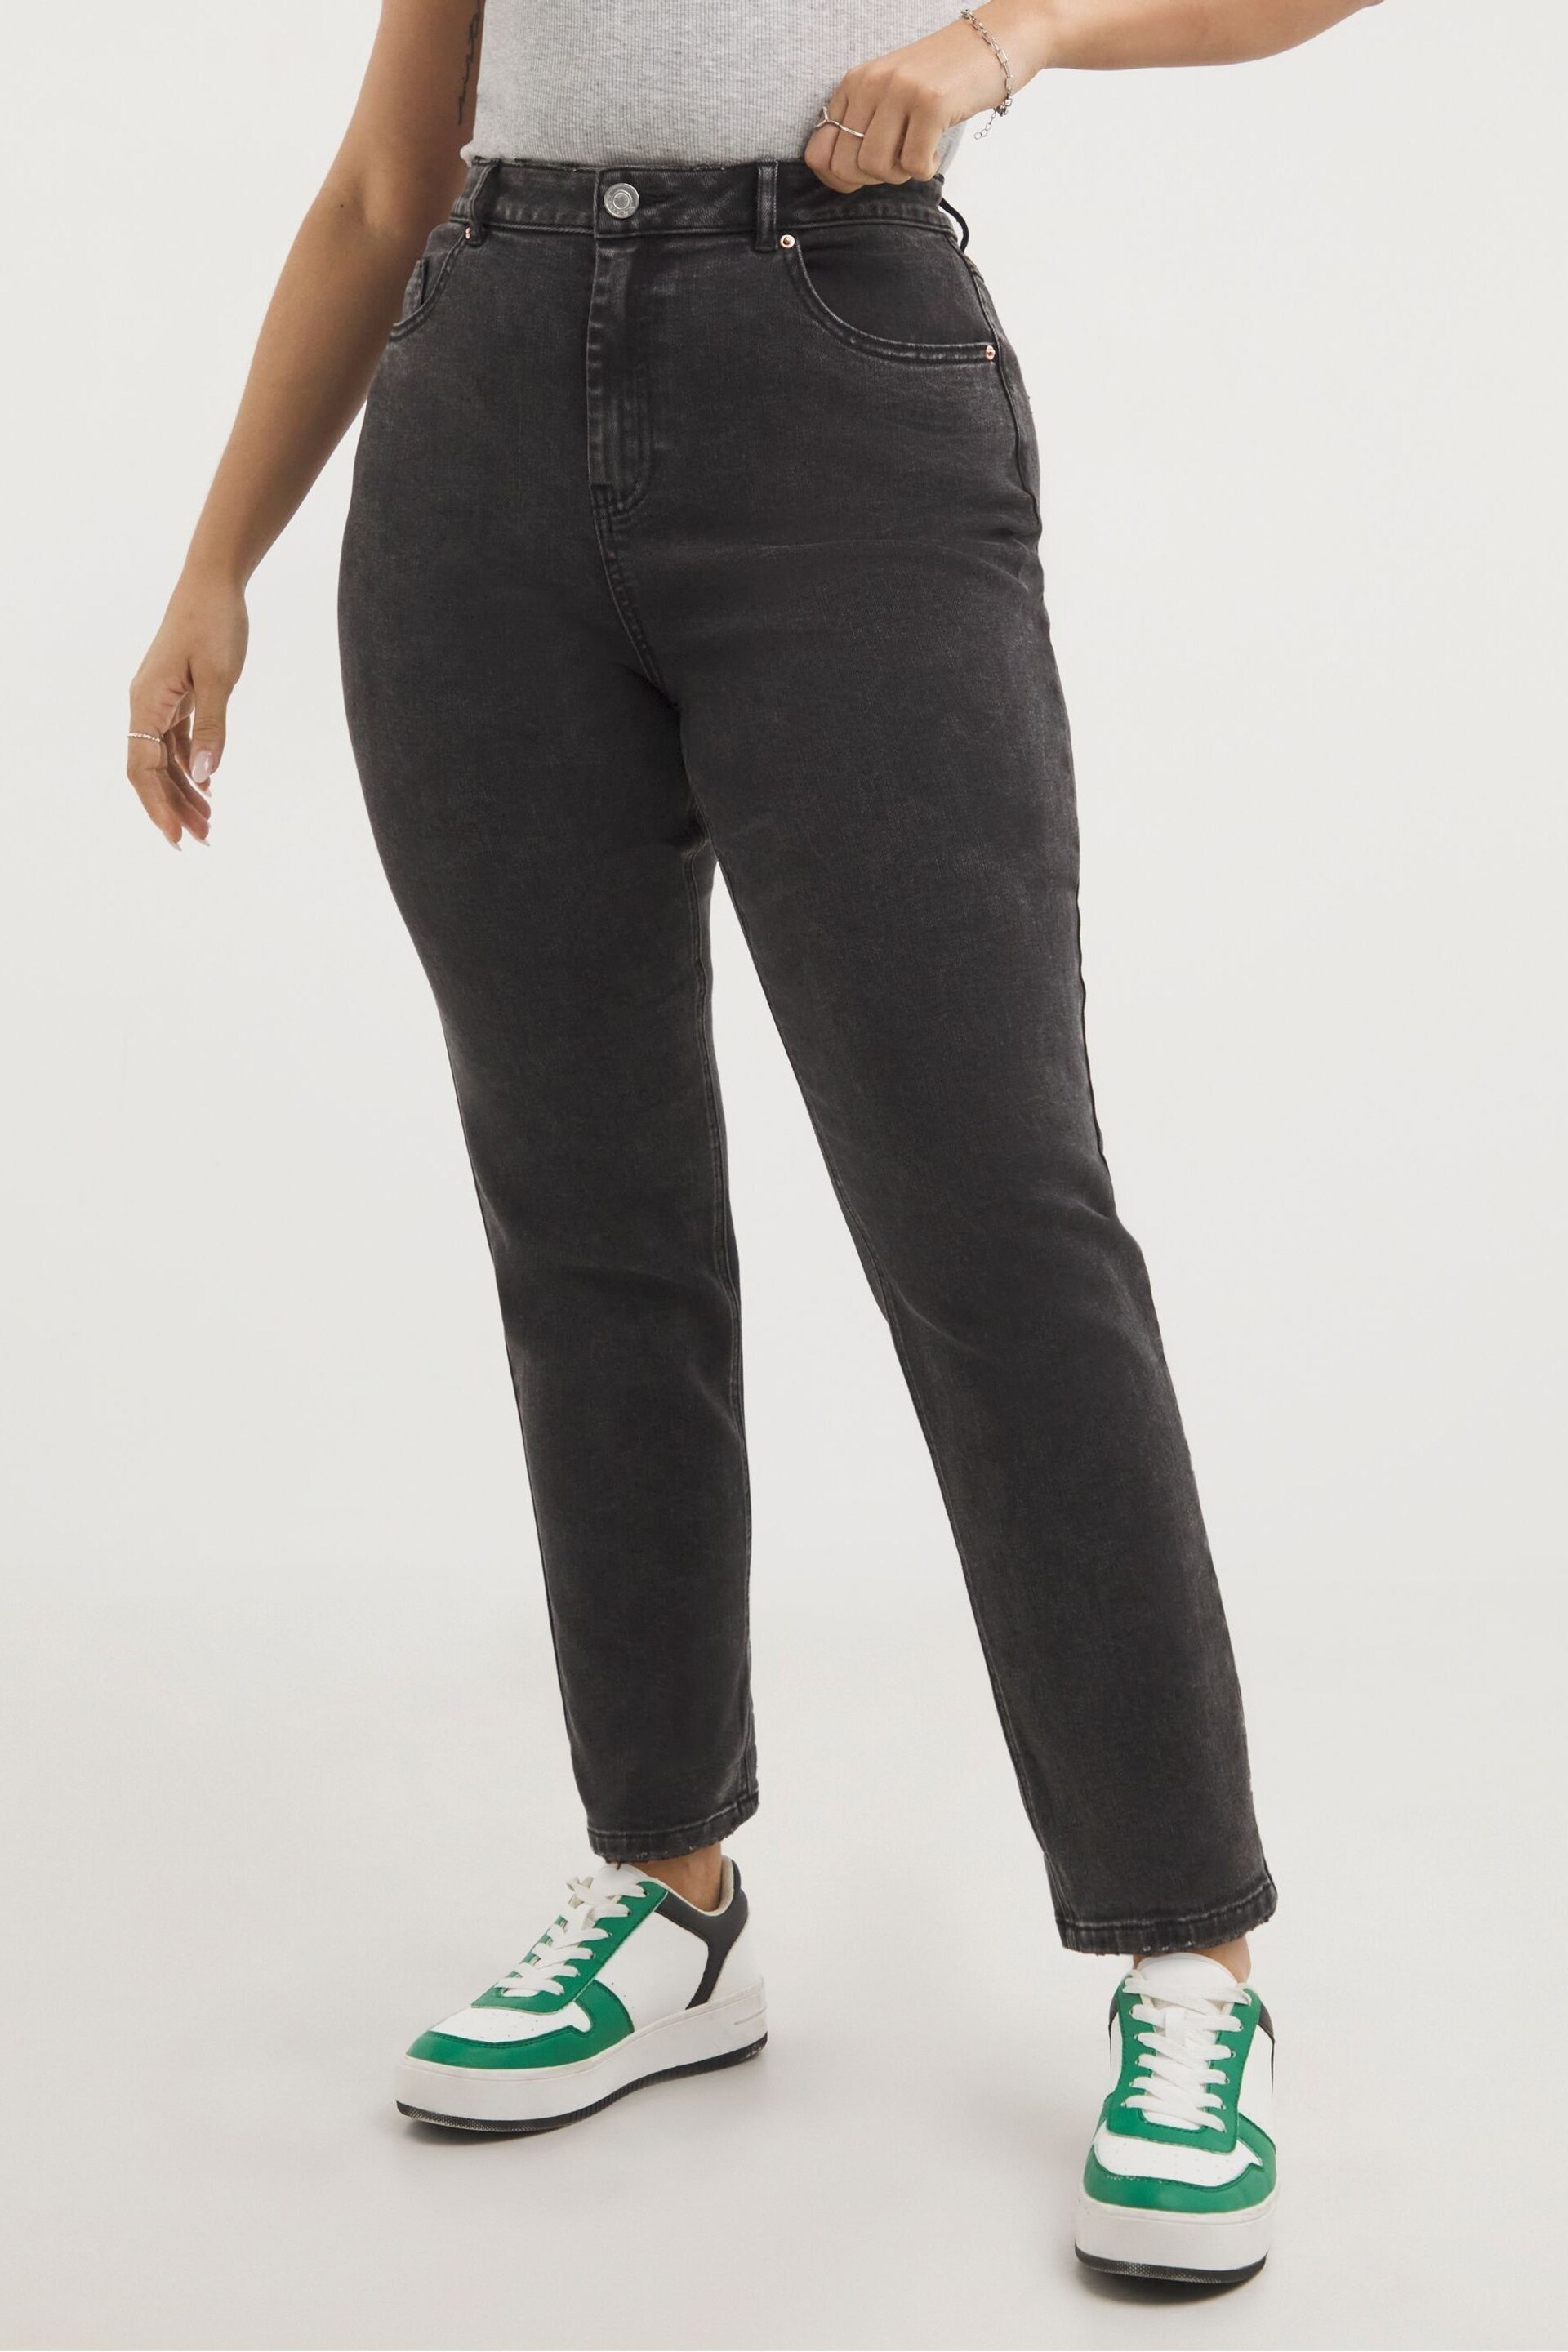 Simply Be Black Wash Womens Demi Mom Jeans - Image 3 of 4